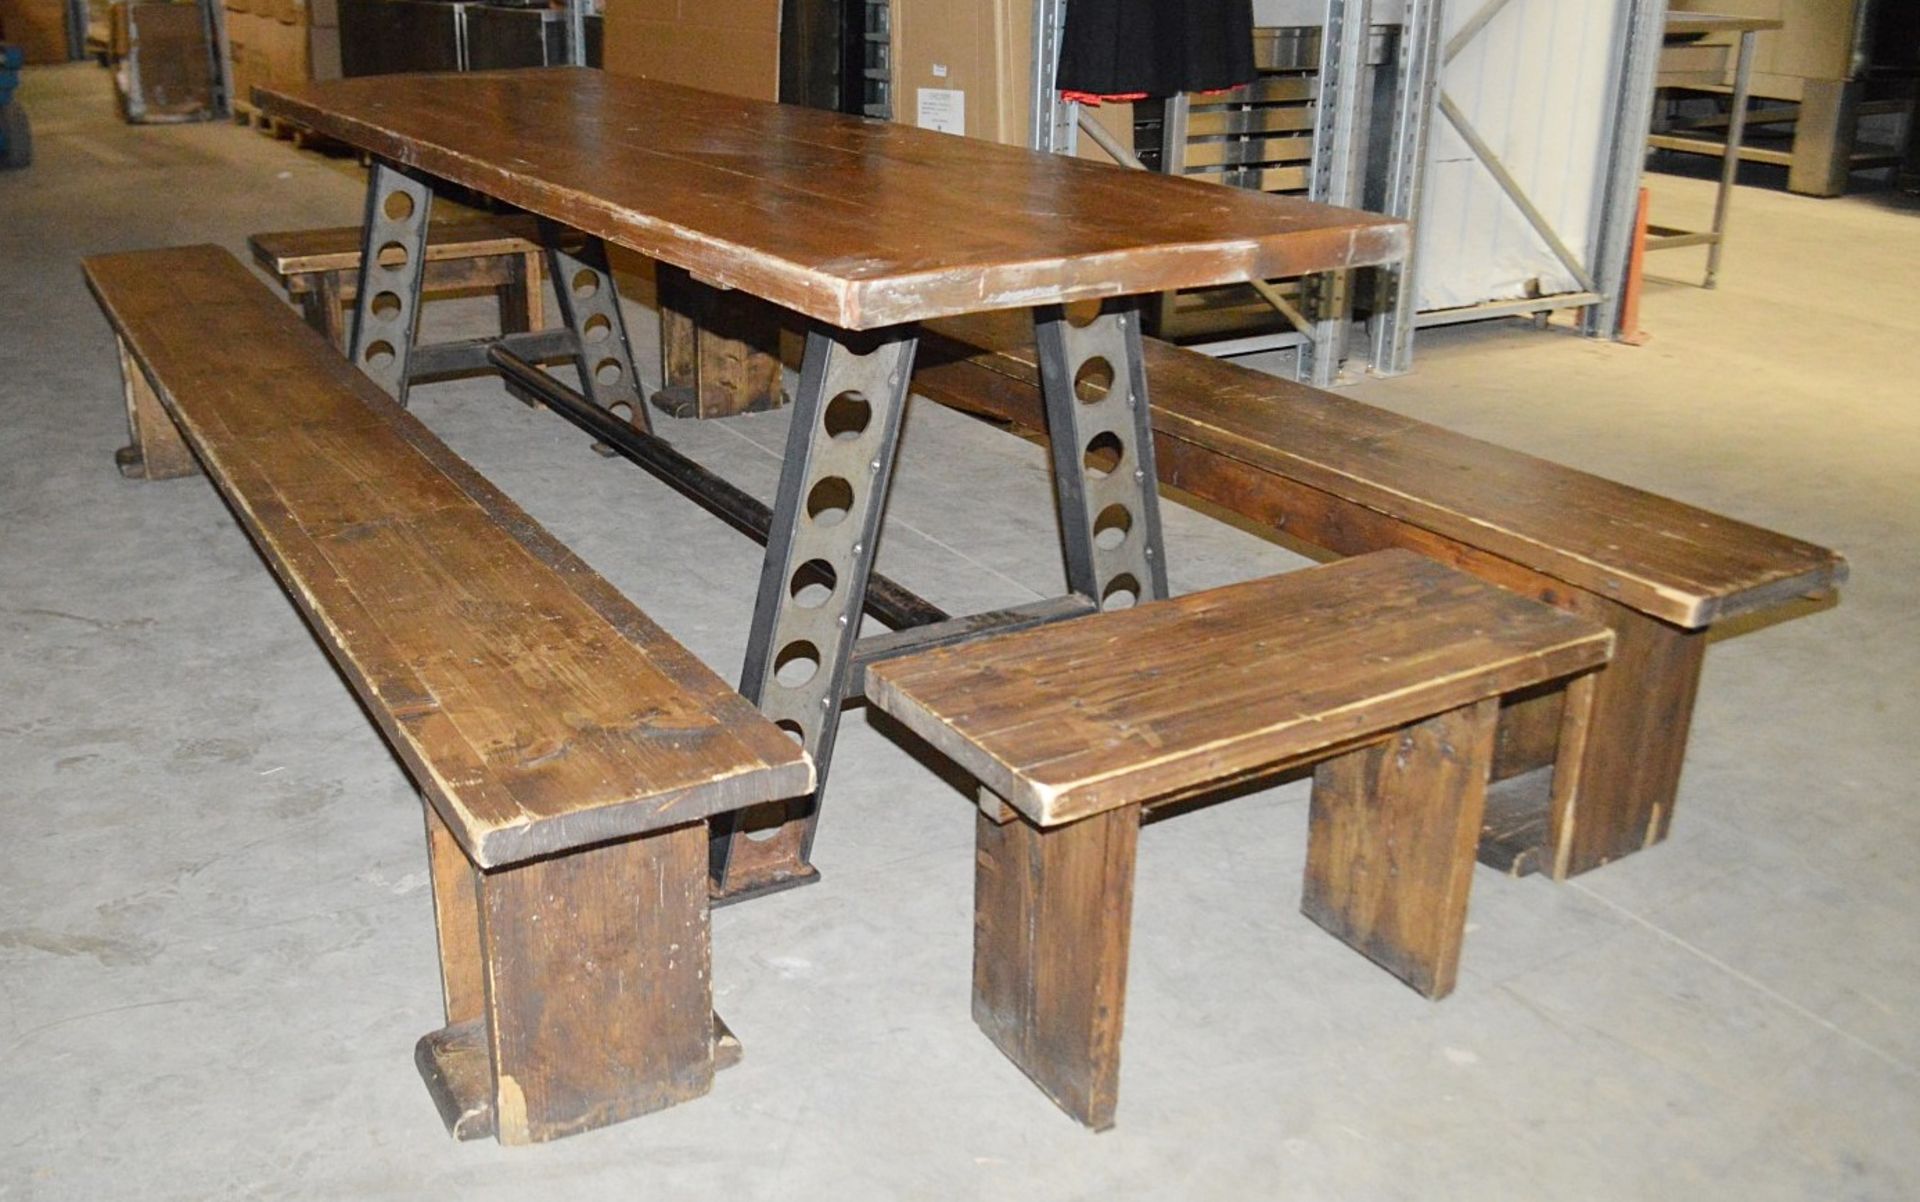 1 x Large Rustic  2.4 Metre Solid Wood Topped Banquet Table With 4 x Benches -  Pre-owned, From A